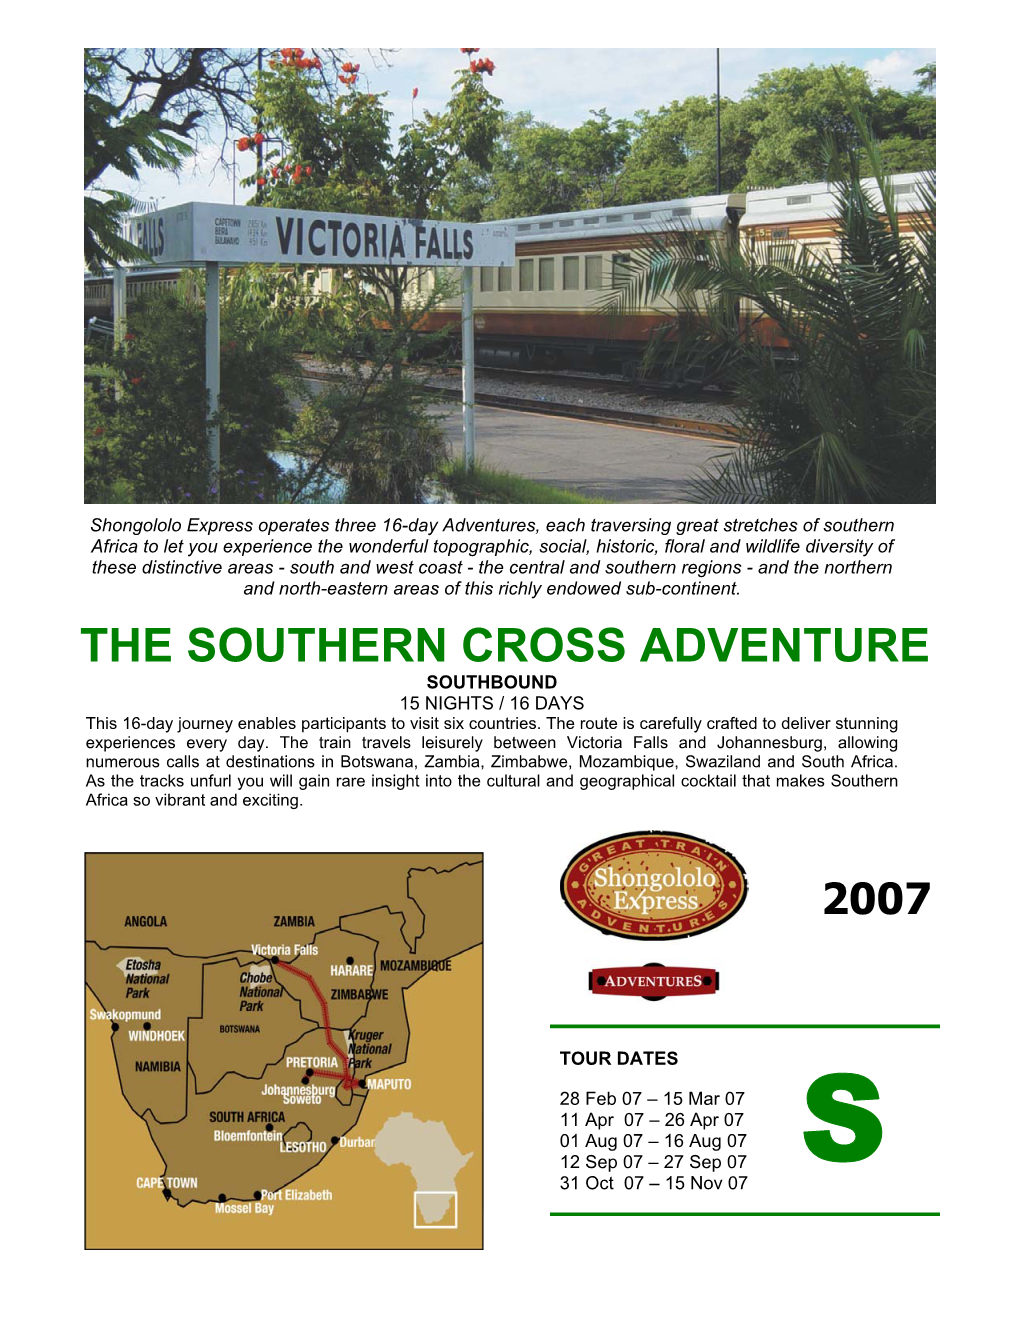 SOUTHBOUND 15 NIGHTS / 16 DAYS This 16-Day Journey Enables Participants to Visit Six Countries